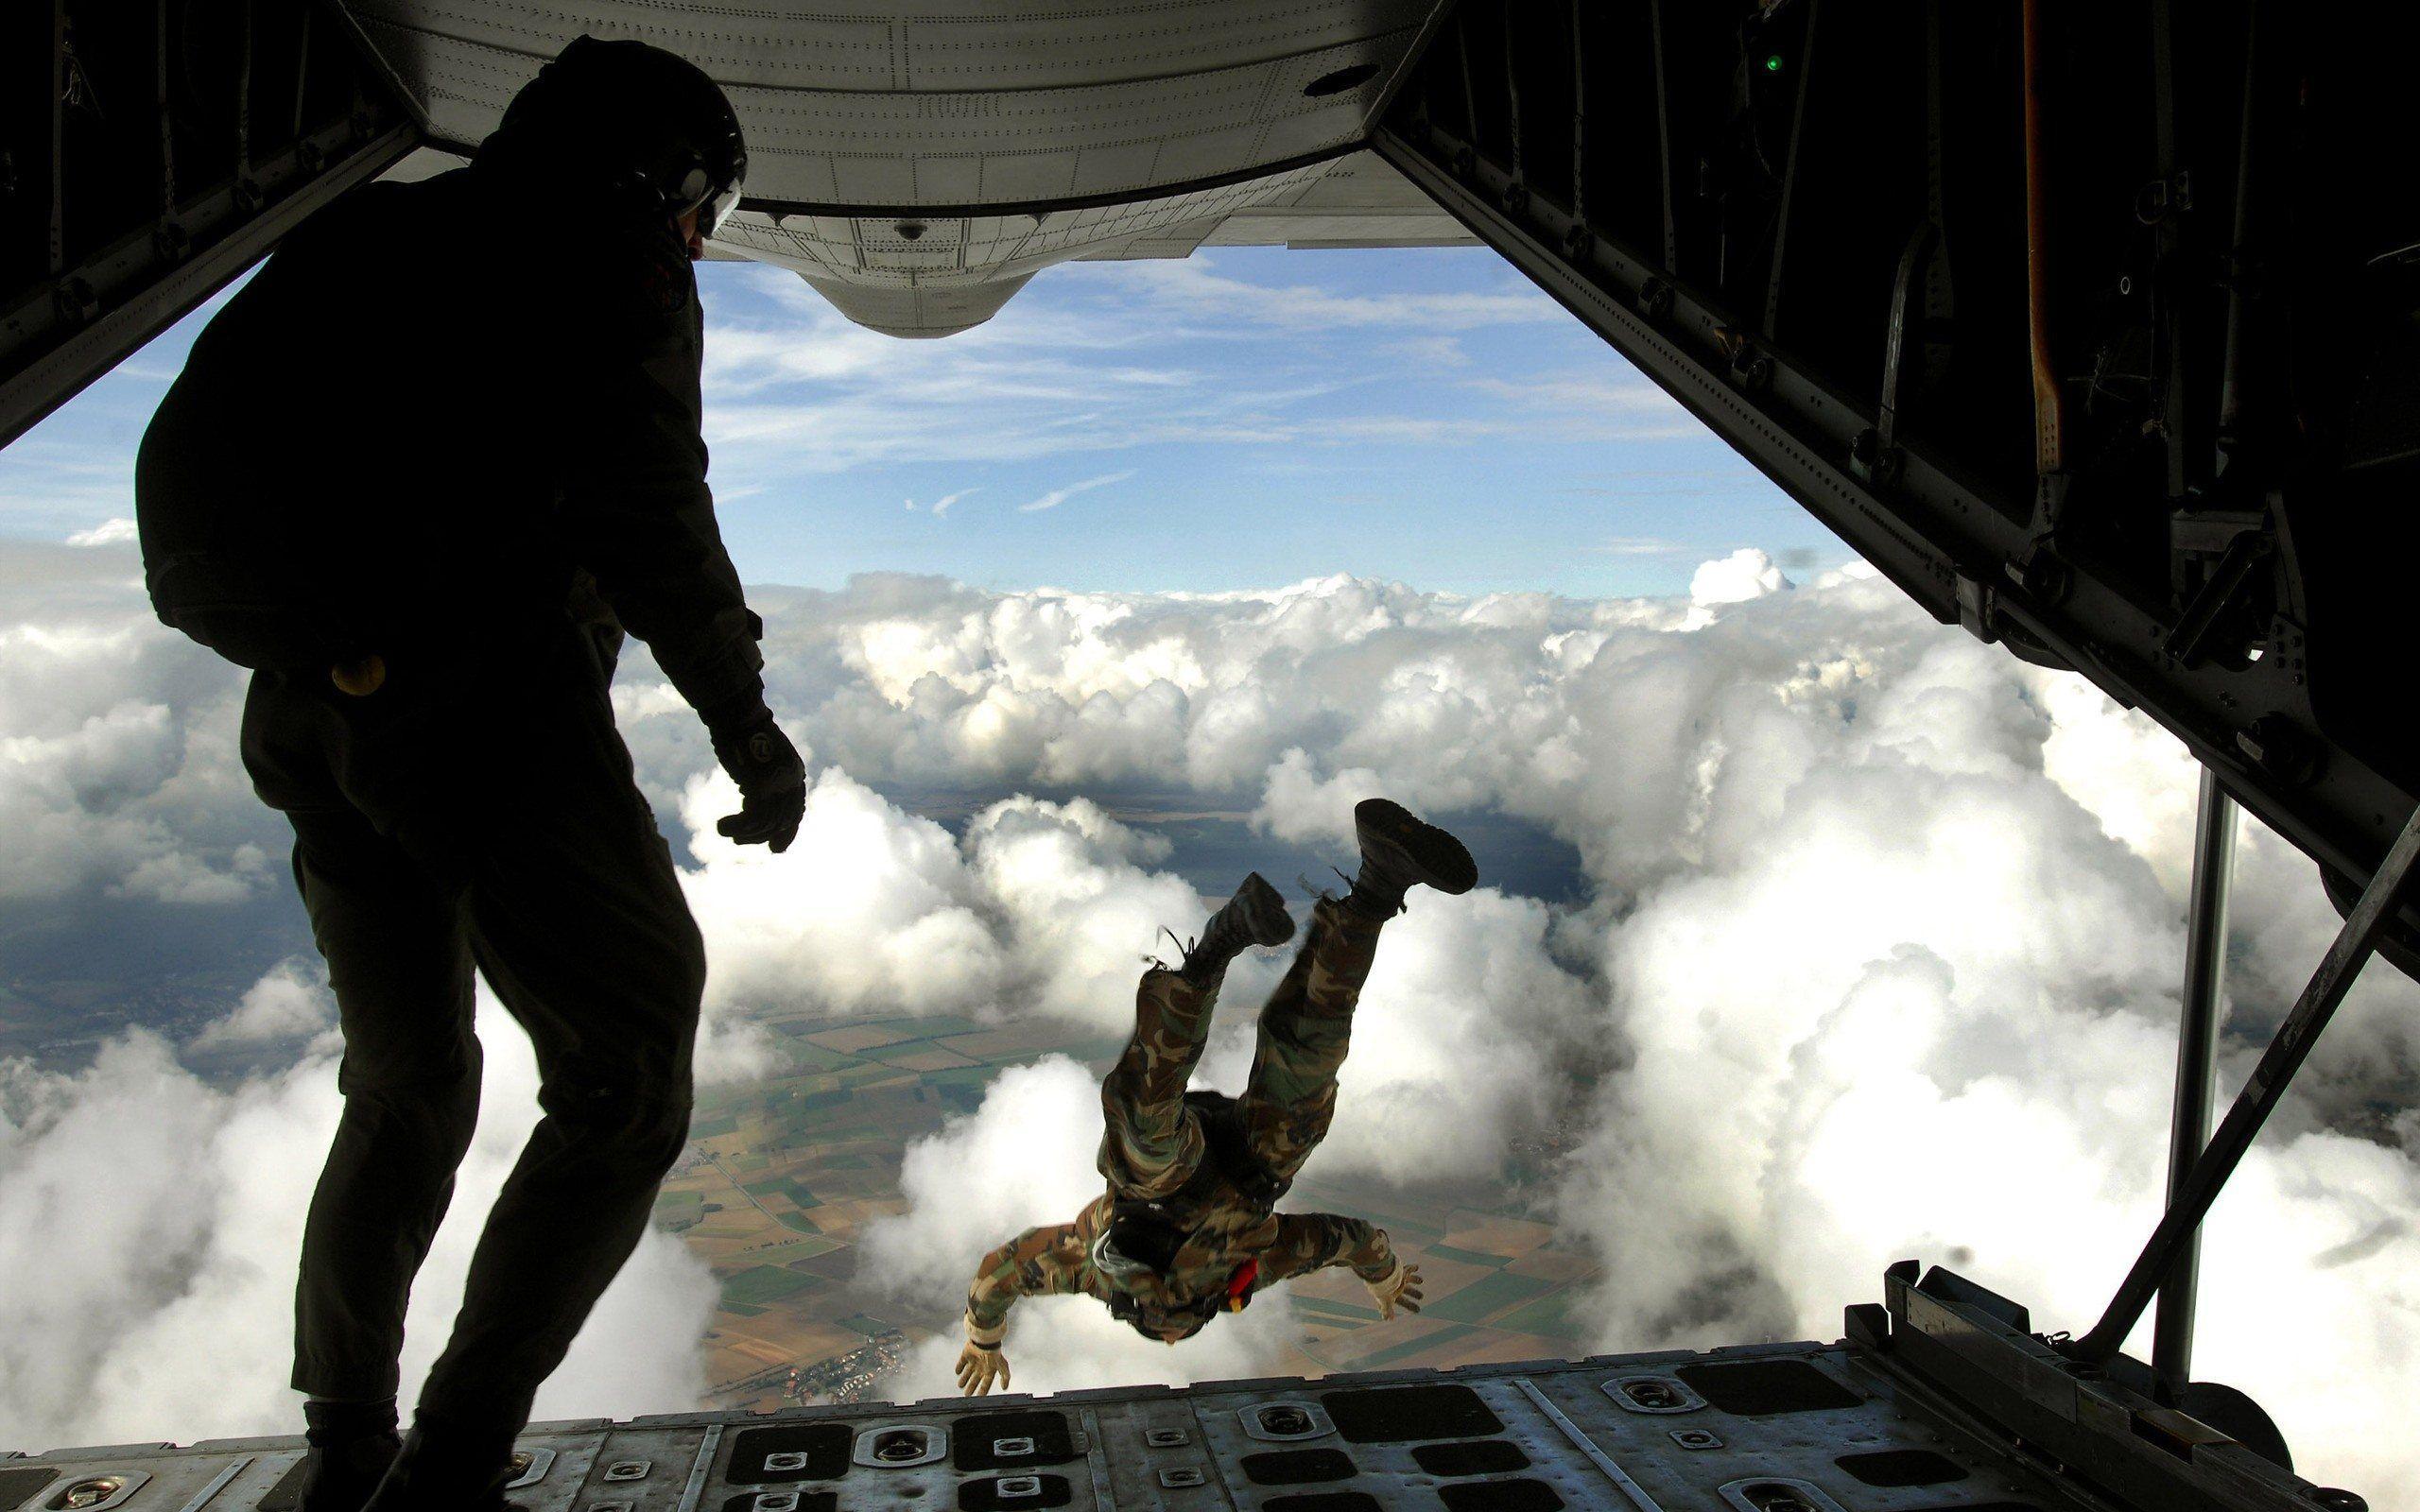 Awesome HD Skydiving Wallpaper